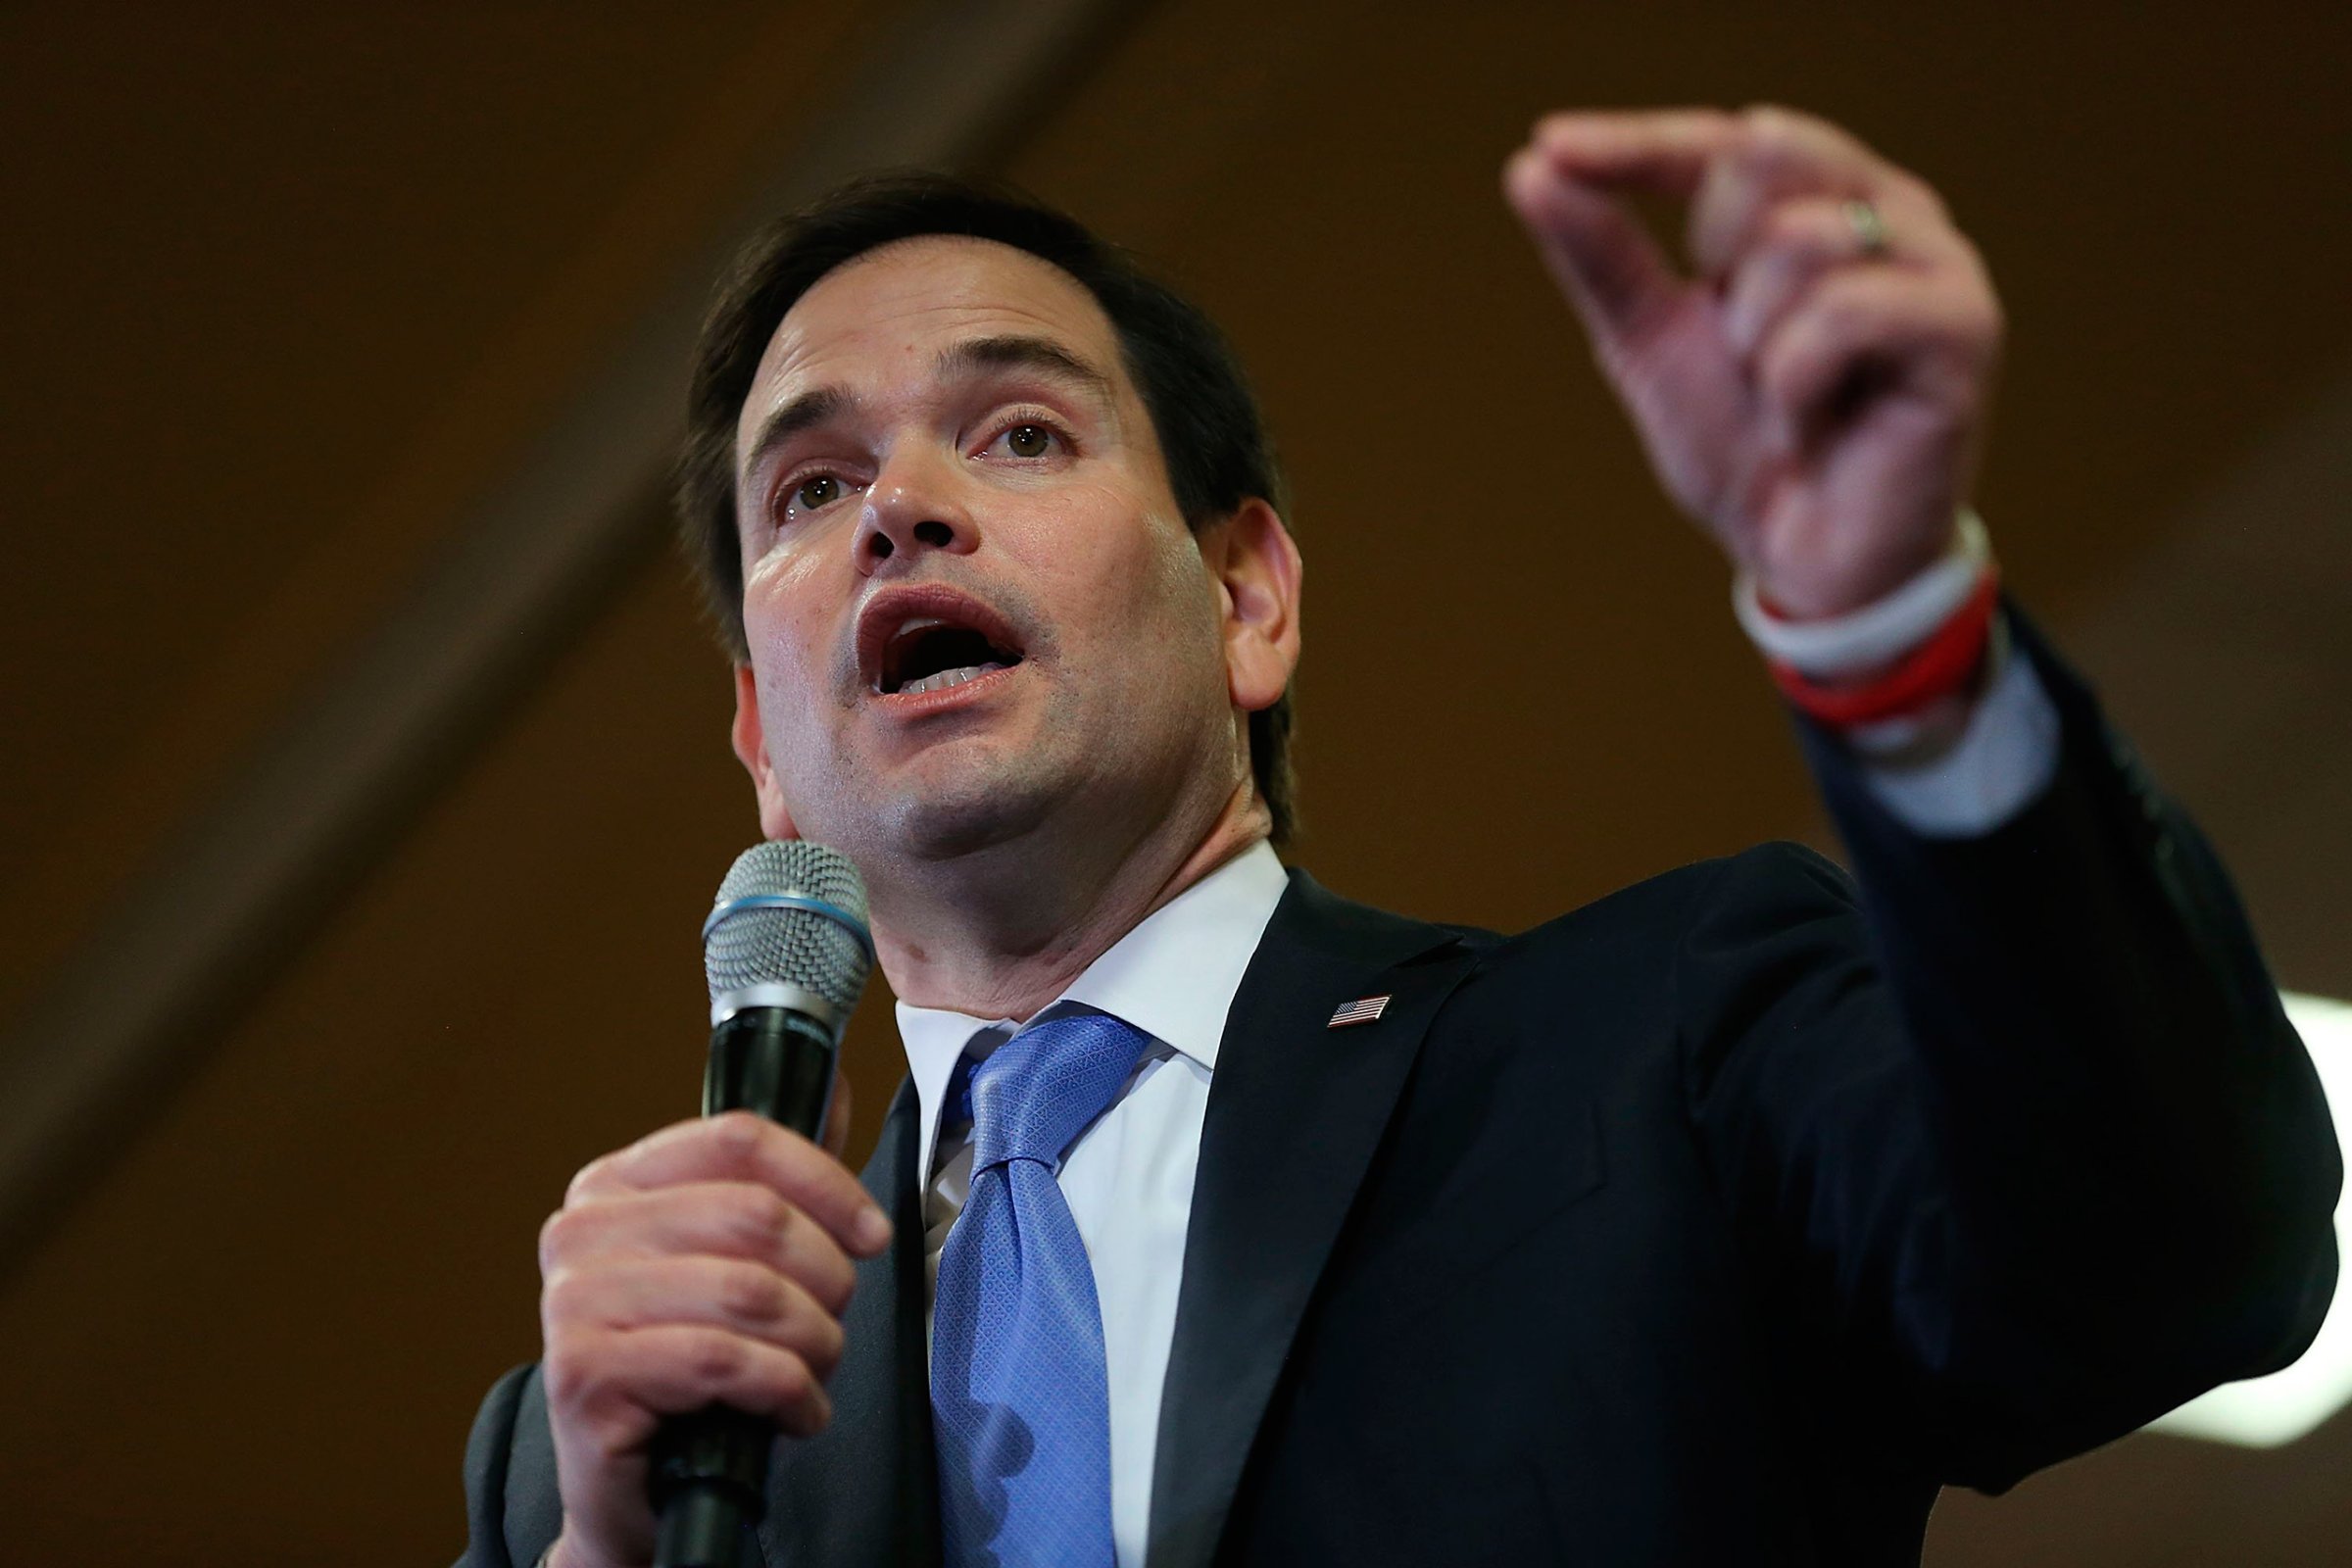 Republican presidential candidate Sen. Marco Rubio speaks during a campaign rally at the Marriott South at Hobby Airport in Houston, Texas, Feb. 24, 2016.